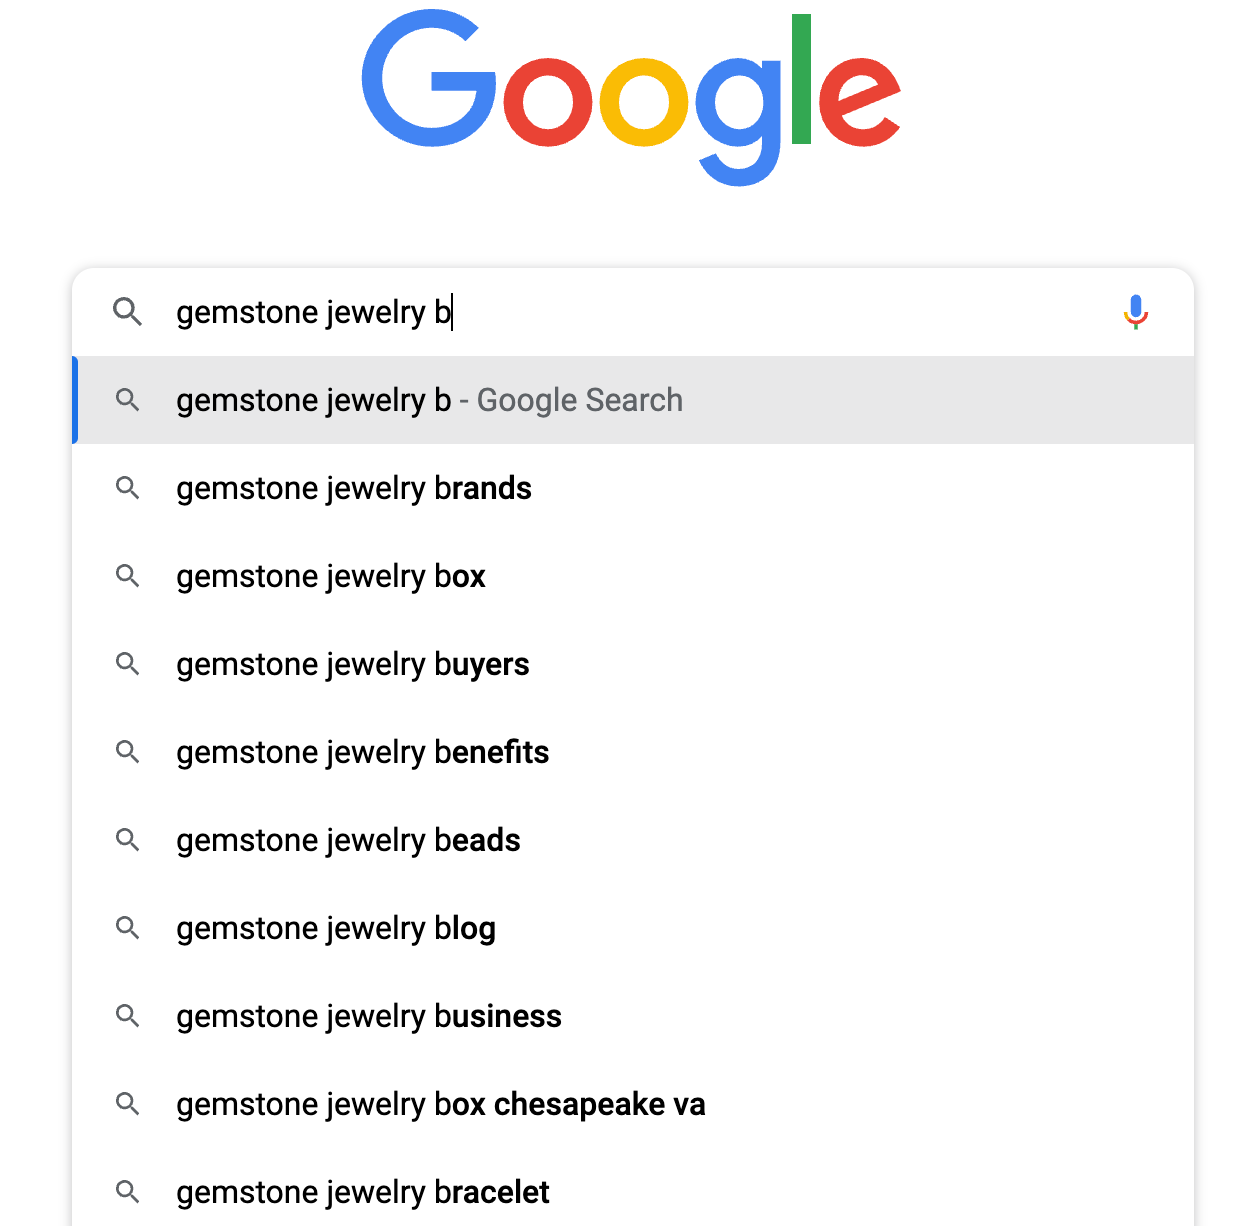 Another Google search